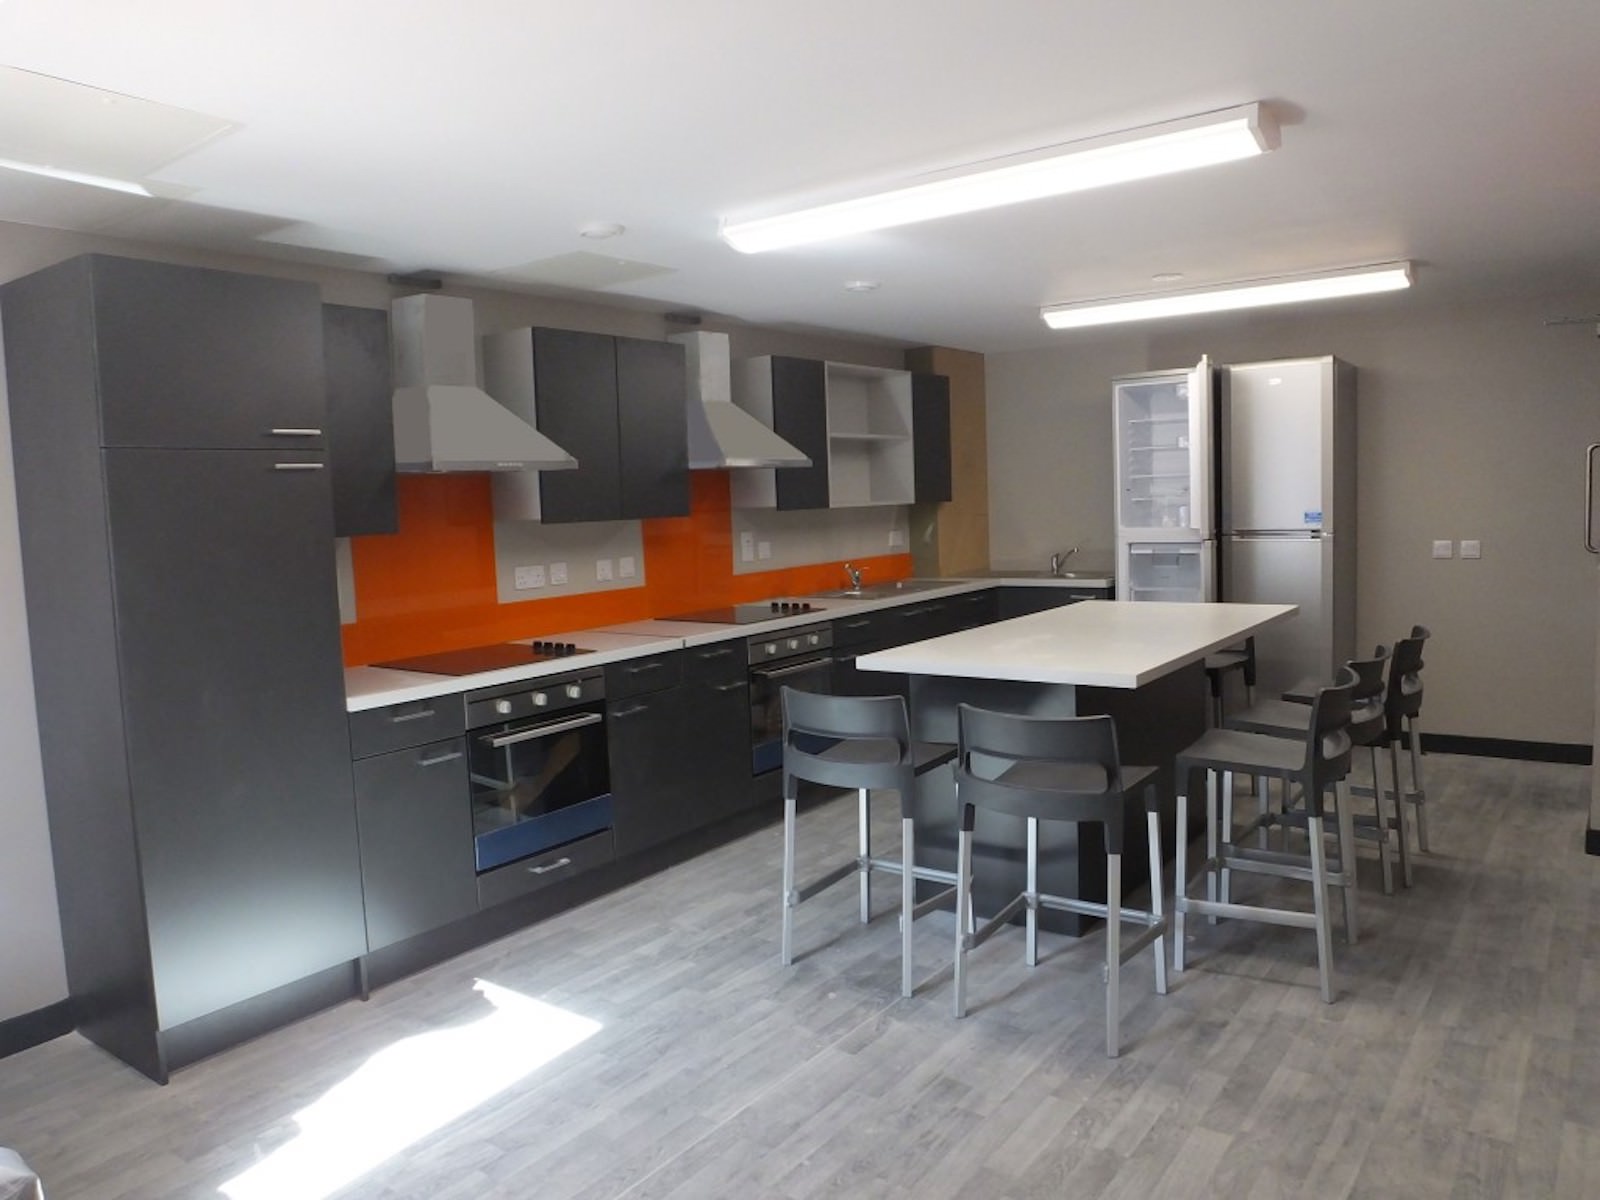 internal view of a kitchen in the gateway building student accomodation